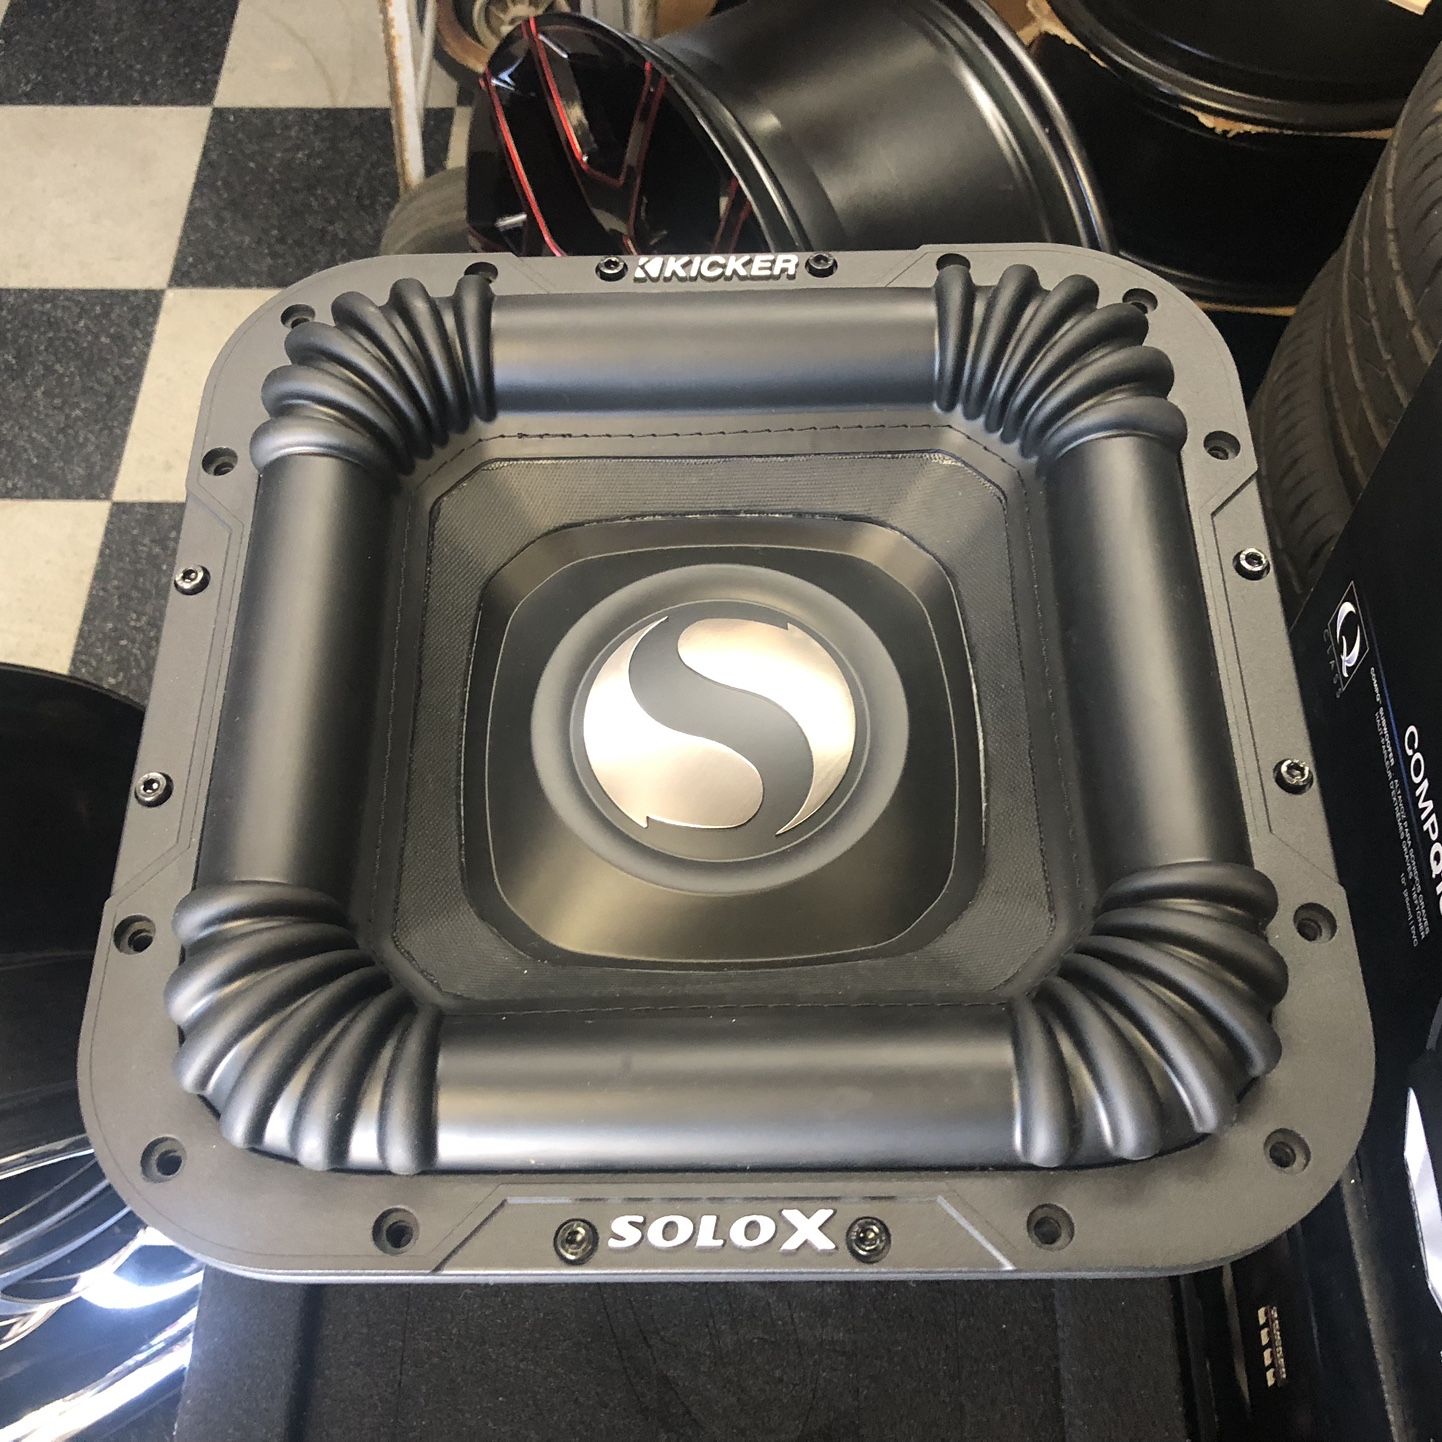 Kicker L7x12 On Sale Today for 629.99